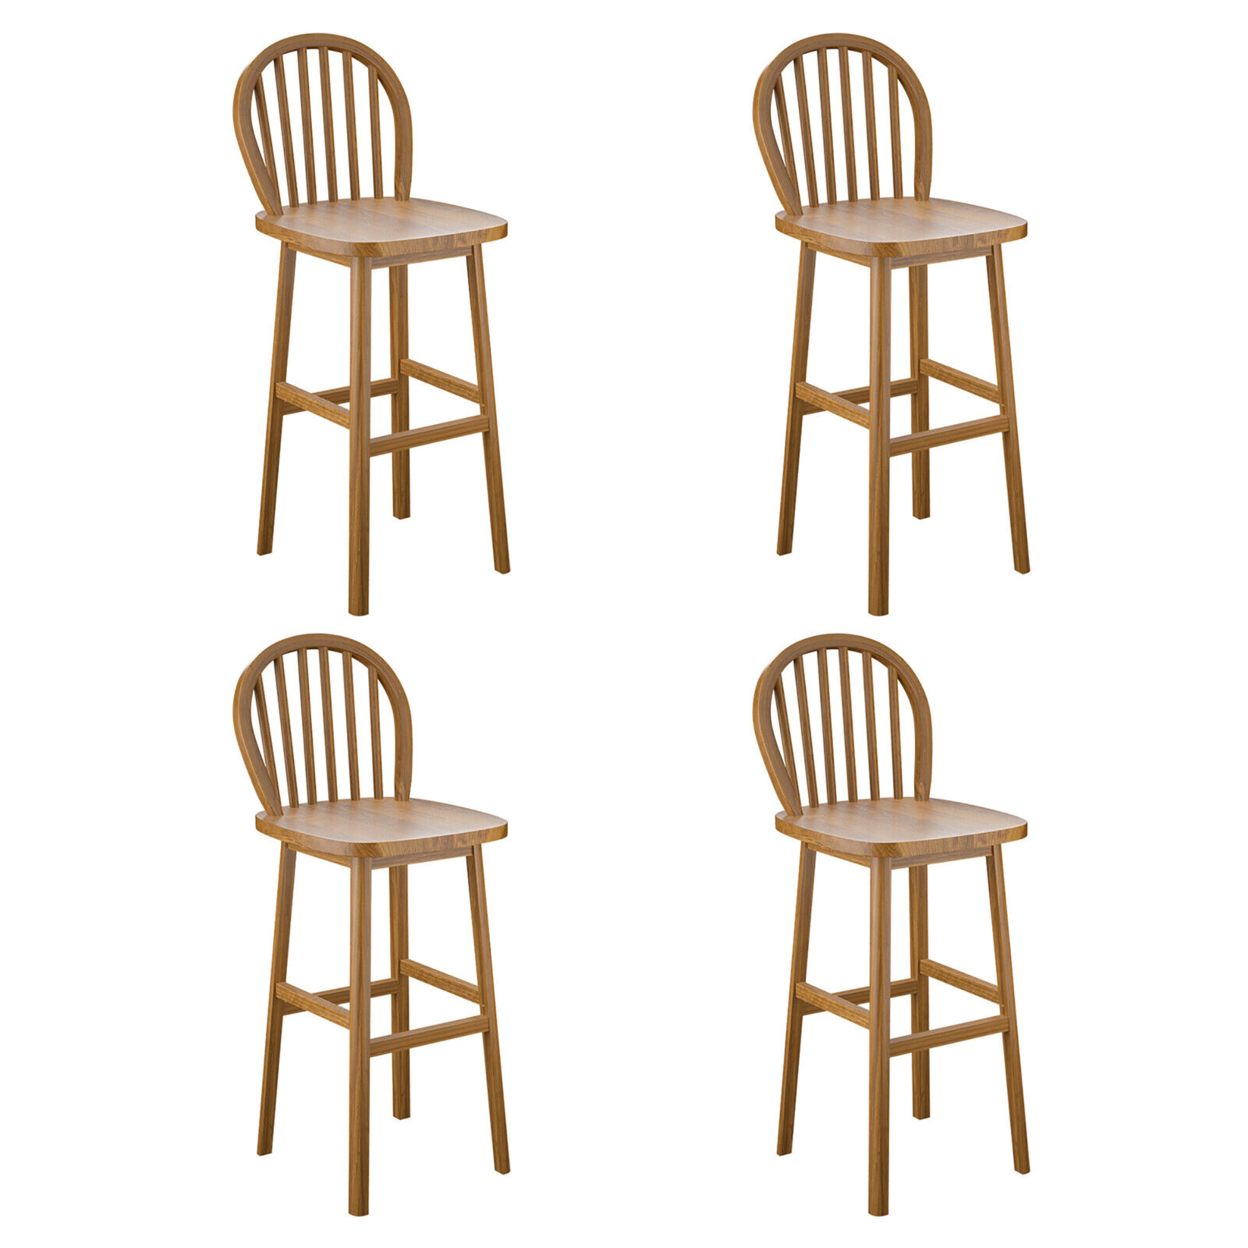 Set Of 4 Bar Stools Spindle-Back Bar Height Rubber Wood Kitchen Chairs Natural